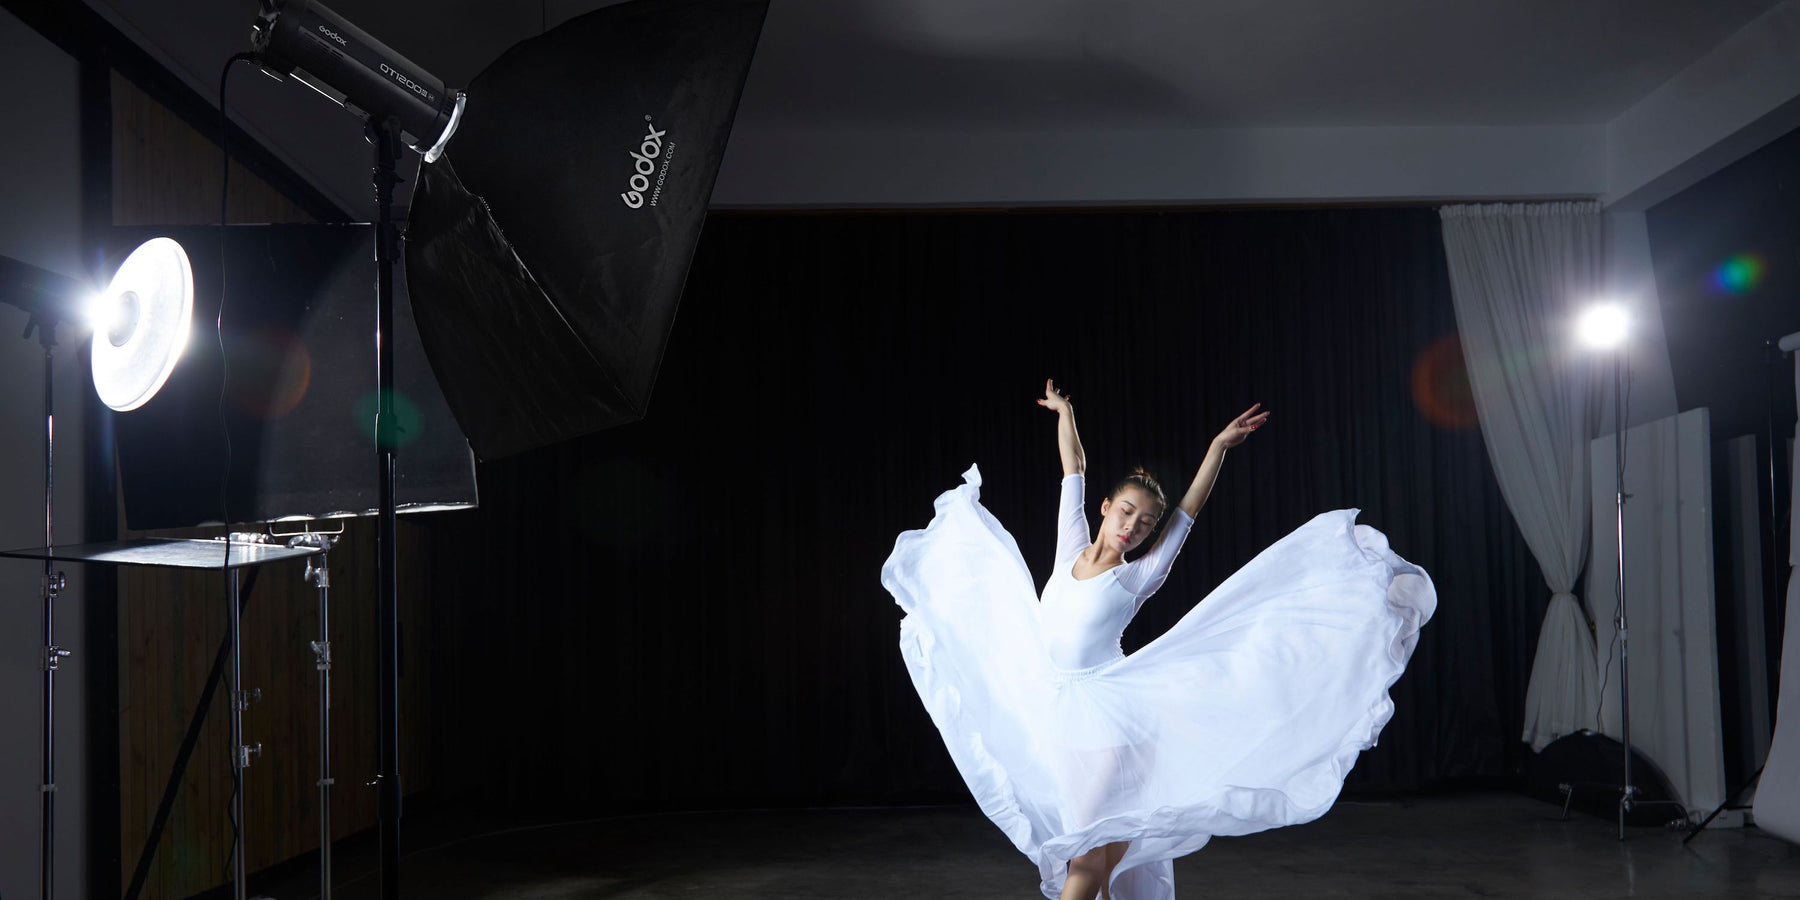 Spreading the Love for Lighting - Godox Joins the TFC Family!